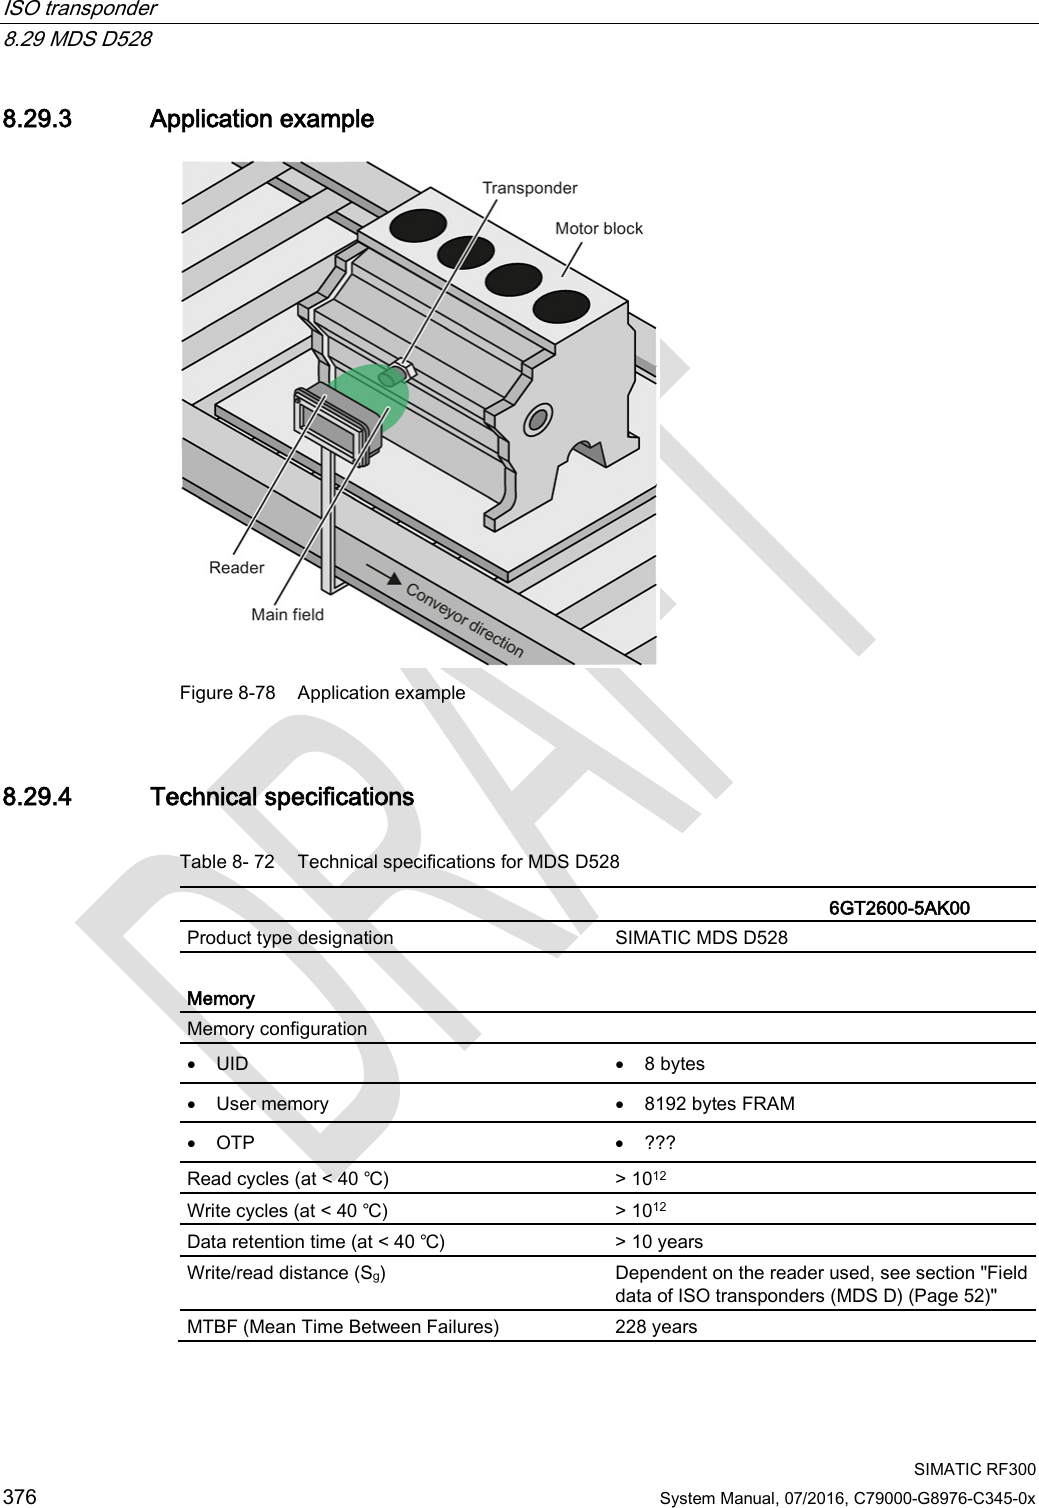 ISO transponder   8.29 MDS D528  SIMATIC RF300 376 System Manual, 07/2016, C79000-G8976-C345-0x 8.29.3 Application example  Figure 8-78 Application example 8.29.4 Technical specifications Table 8- 72 Technical specifications for MDS D528    6GT2600-5AK00  Product type designation SIMATIC MDS D528  Memory Memory configuration   • UID • 8 bytes • User memory • 8192 bytes FRAM • OTP • ??? Read cycles (at &lt; 40 ℃) &gt; 1012 Write cycles (at &lt; 40 ℃) &gt; 1012 Data retention time (at &lt; 40 ℃) &gt; 10 years Write/read distance (Sg)  Dependent on the reader used, see section &quot;Field data of ISO transponders (MDS D) (Page 52)&quot; MTBF (Mean Time Between Failures) 228 years 